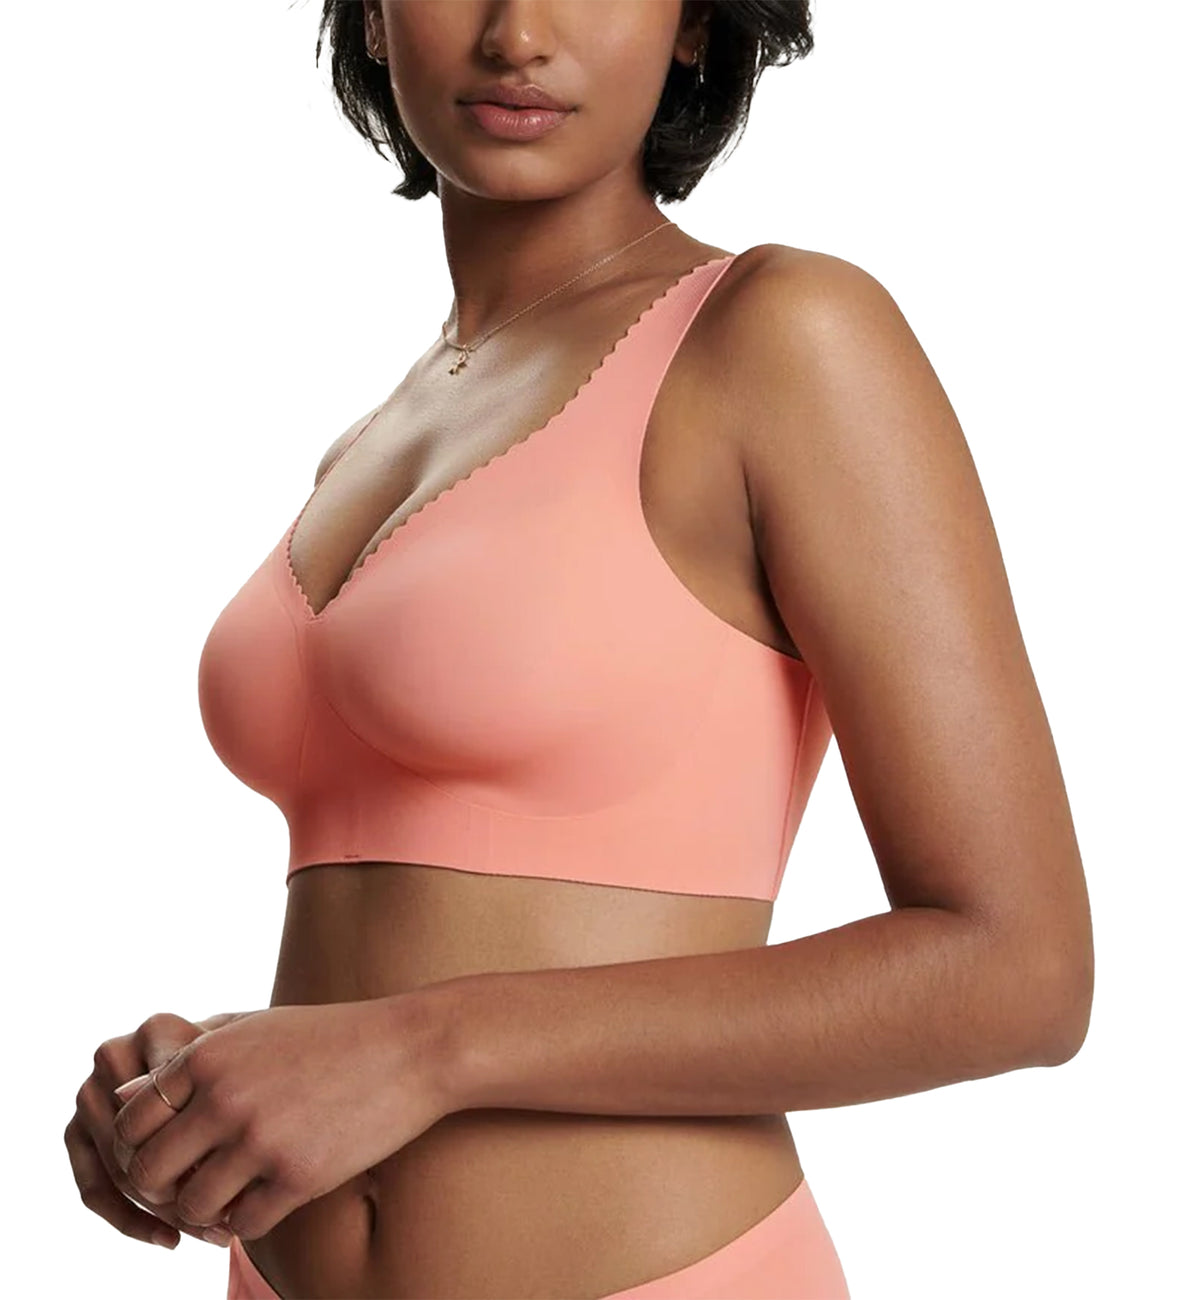 Evelyn &amp; Bobbie EVELYN Deep V-Neck Bralette (1834),Small,Coral - Coral,Small